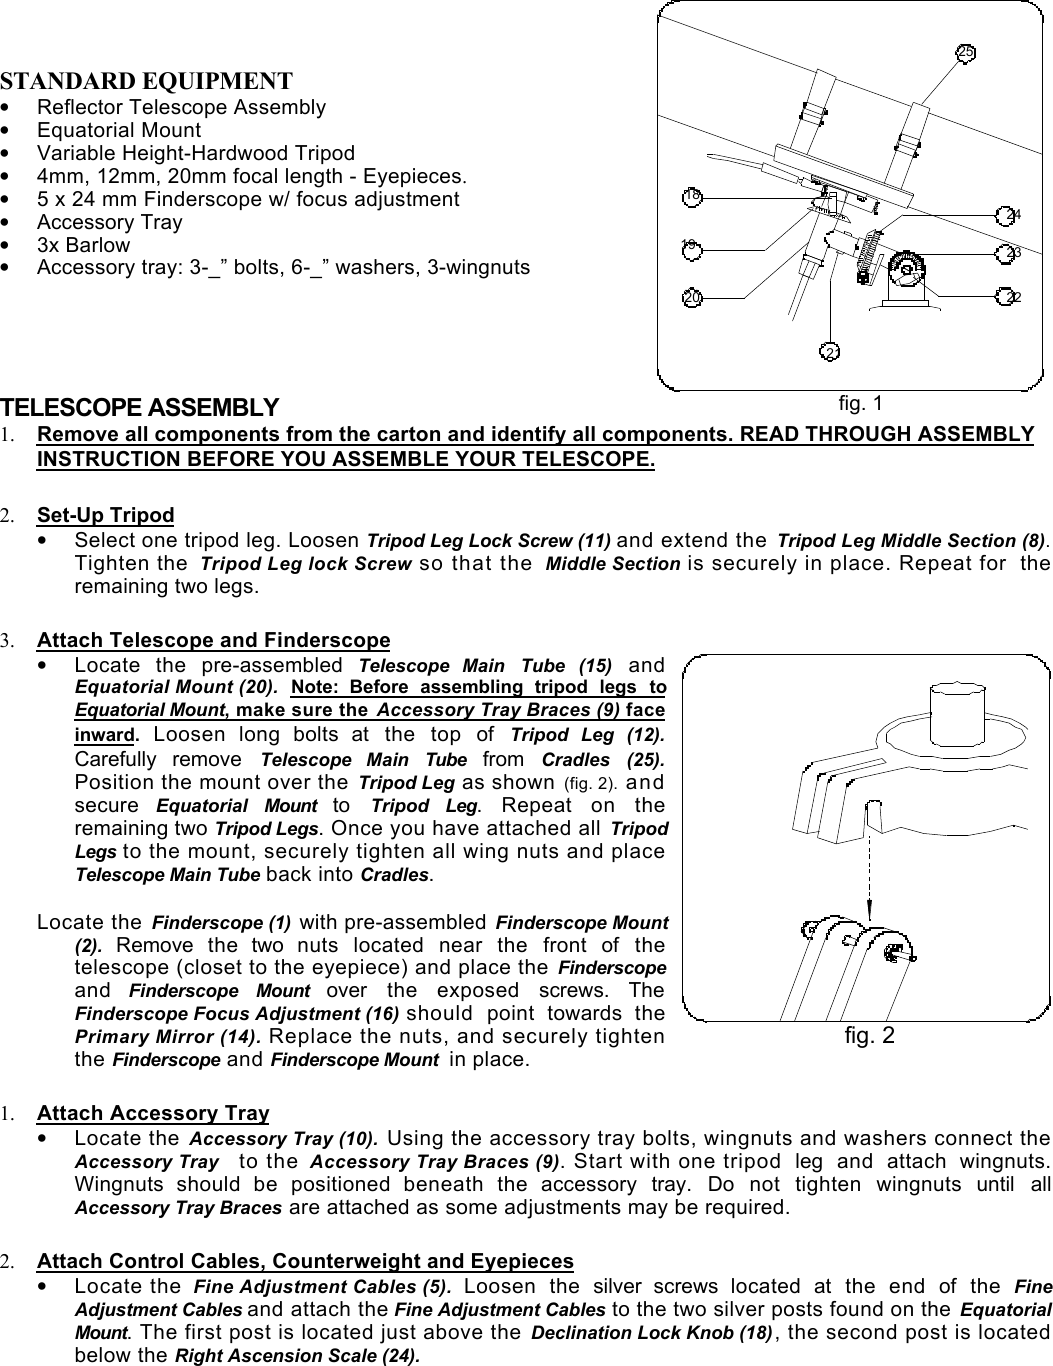 Page 2 of 6 - Bushnell Bushnell-Deep-Space-78-9518-Users-Manual-  Bushnell-deep-space-78-9518-users-manual